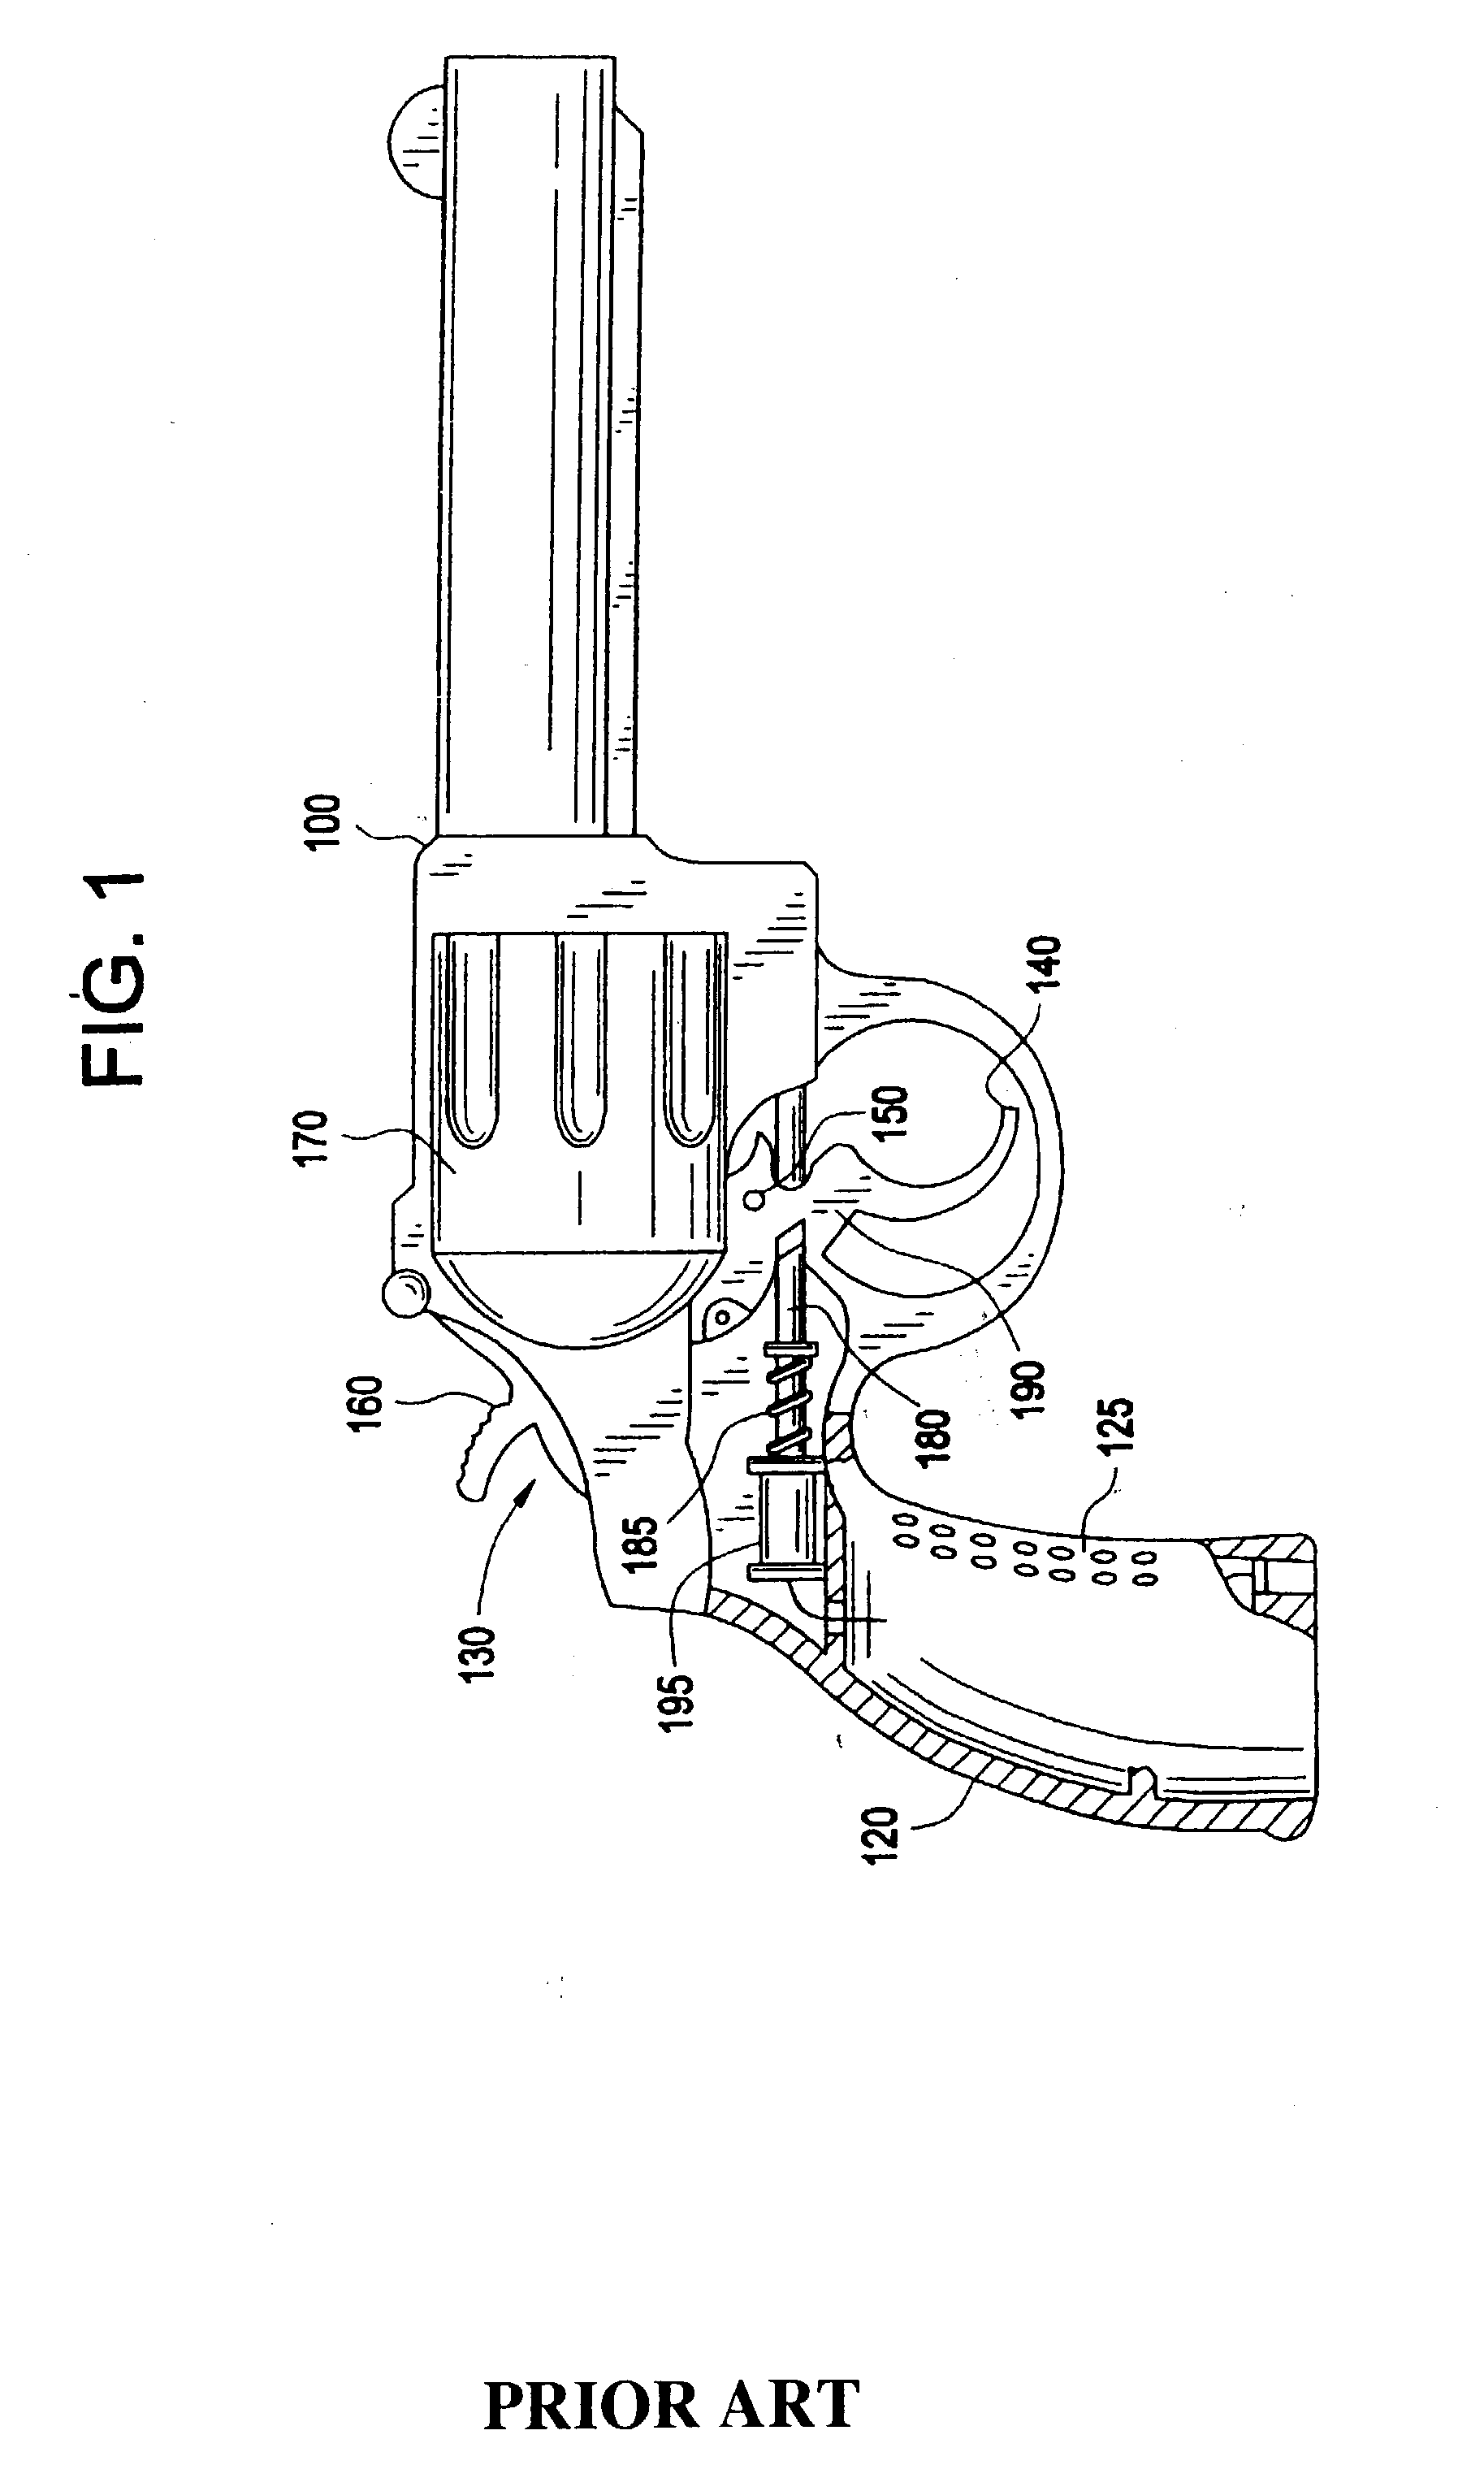 Sensor array for unauthorized user prevention device